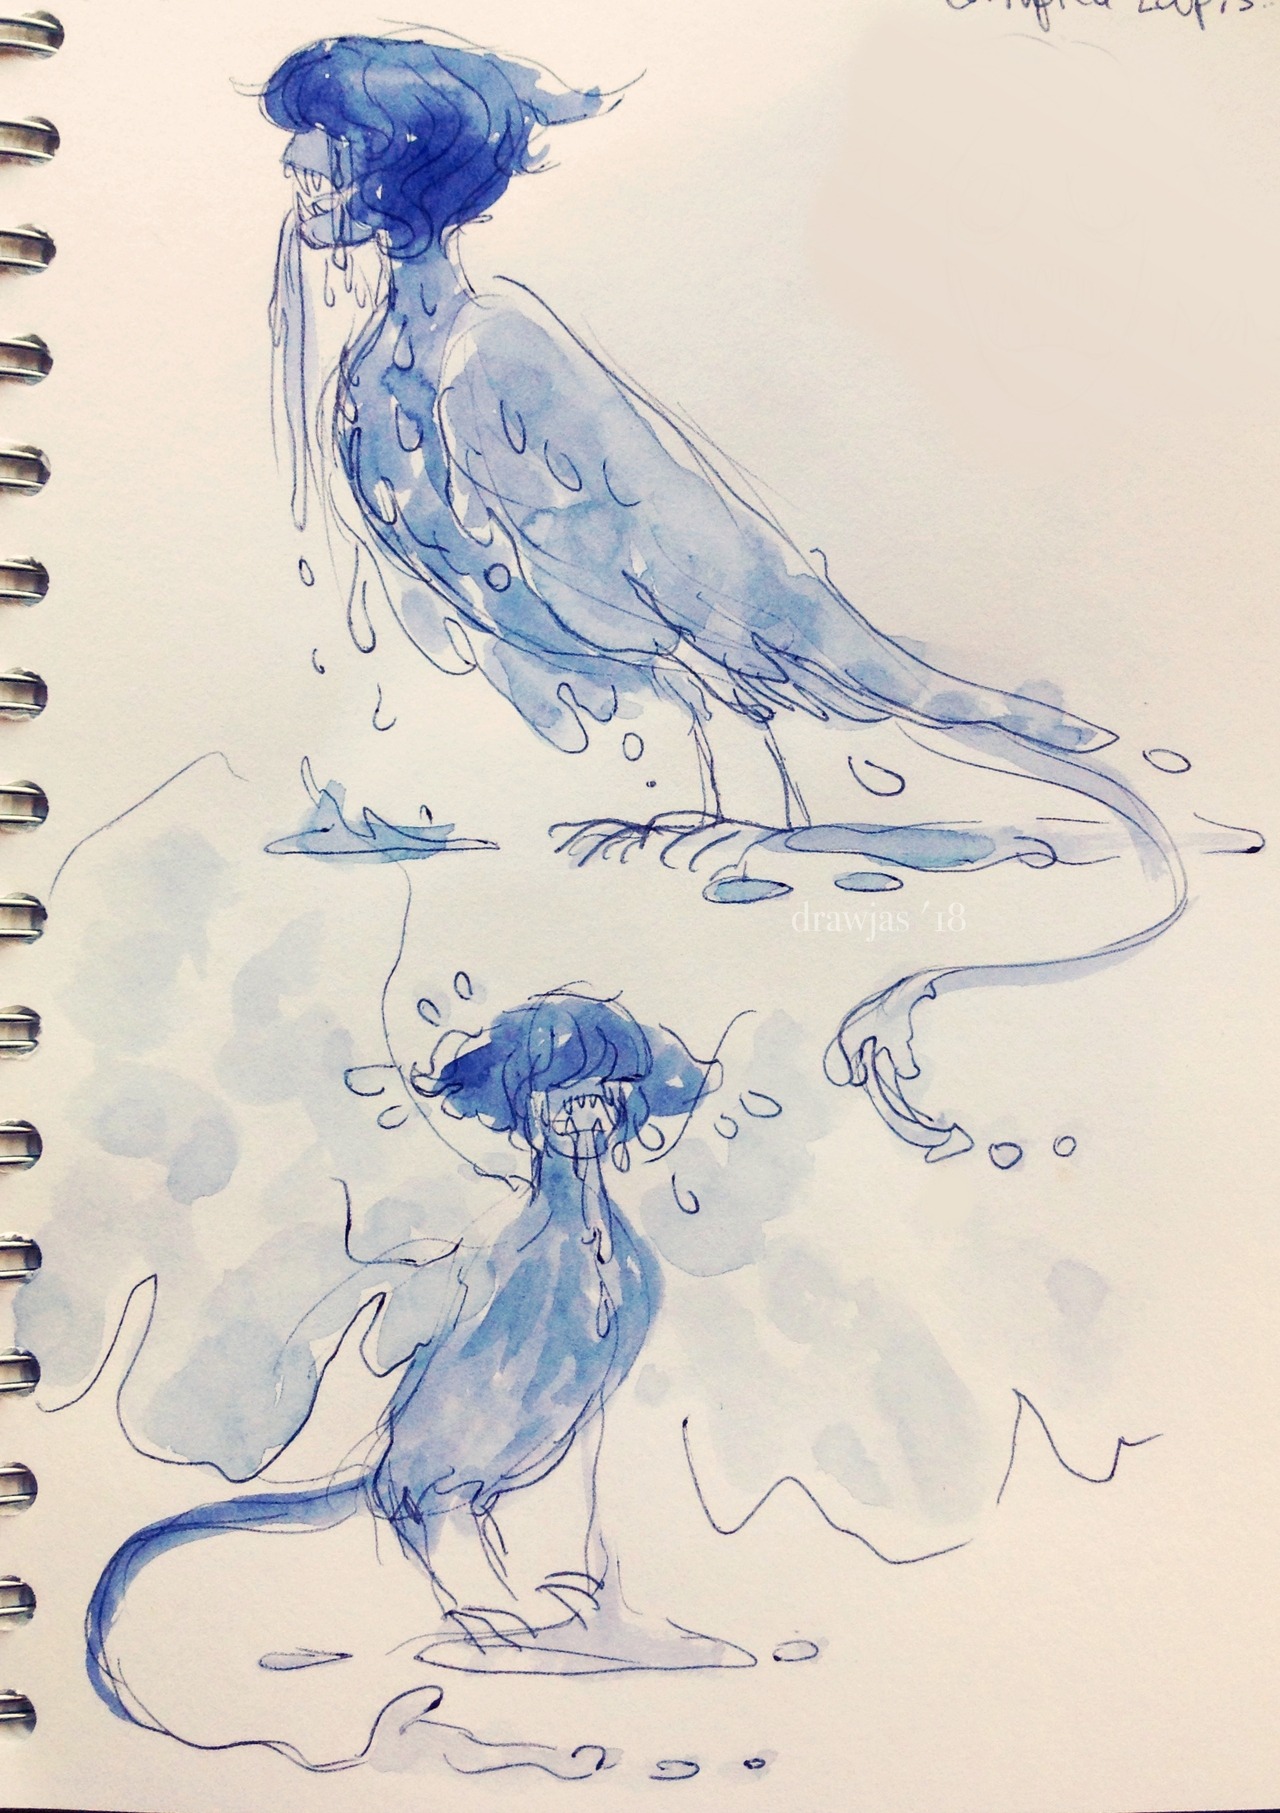 corrupted Lapis ideas, a screaming watery harpy type thing :^o ..6may2018